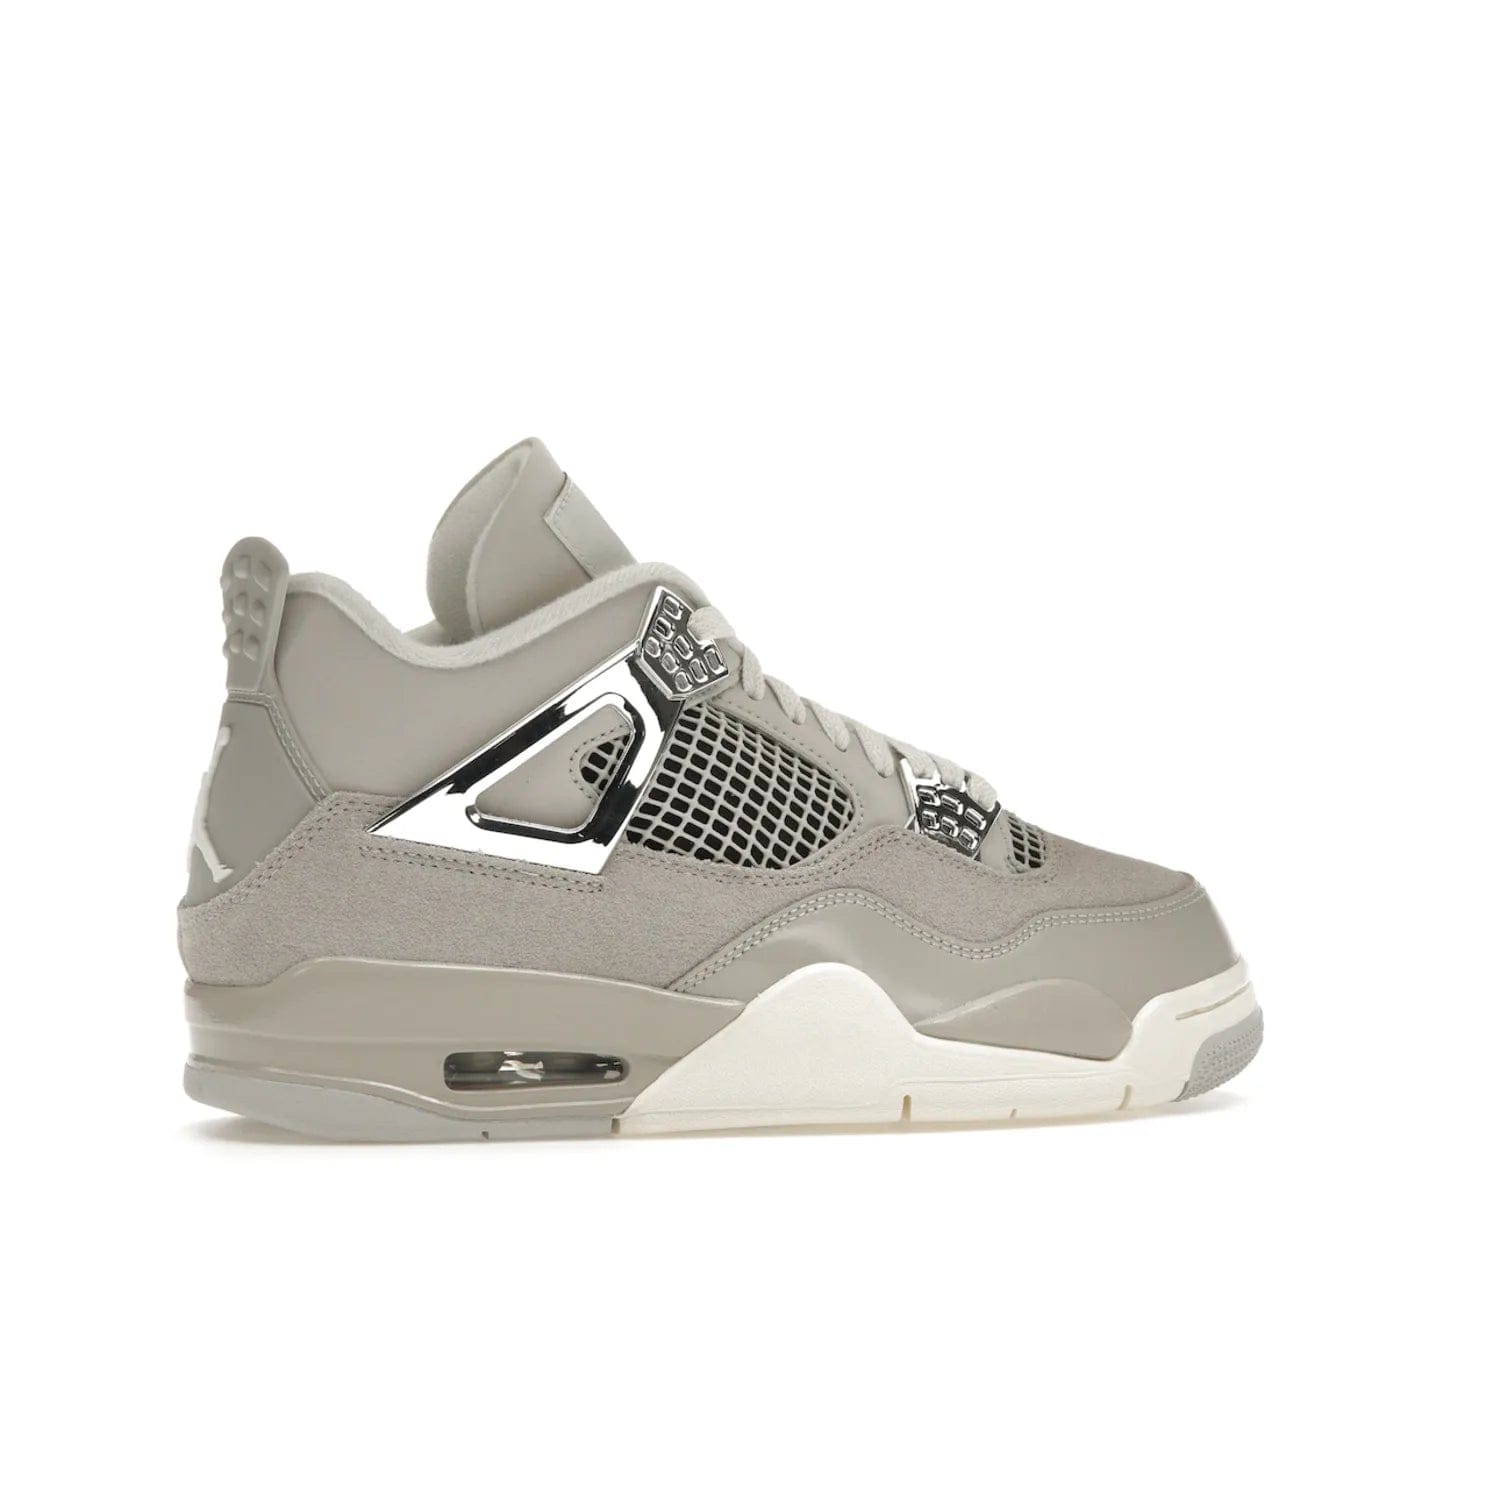 Jordan 4 Retro Frozen Moments (Women's) - Image 35 - Only at www.BallersClubKickz.com - The Jordan 4 Retro Frozen Moments is a stylish blend of classic design elements and modern tones. Featuring suede and leather overlays in a light iron-ore, sail, neutral grey, black, and metallic silver colorway. Get this iconic high-performance sneaker for $210.